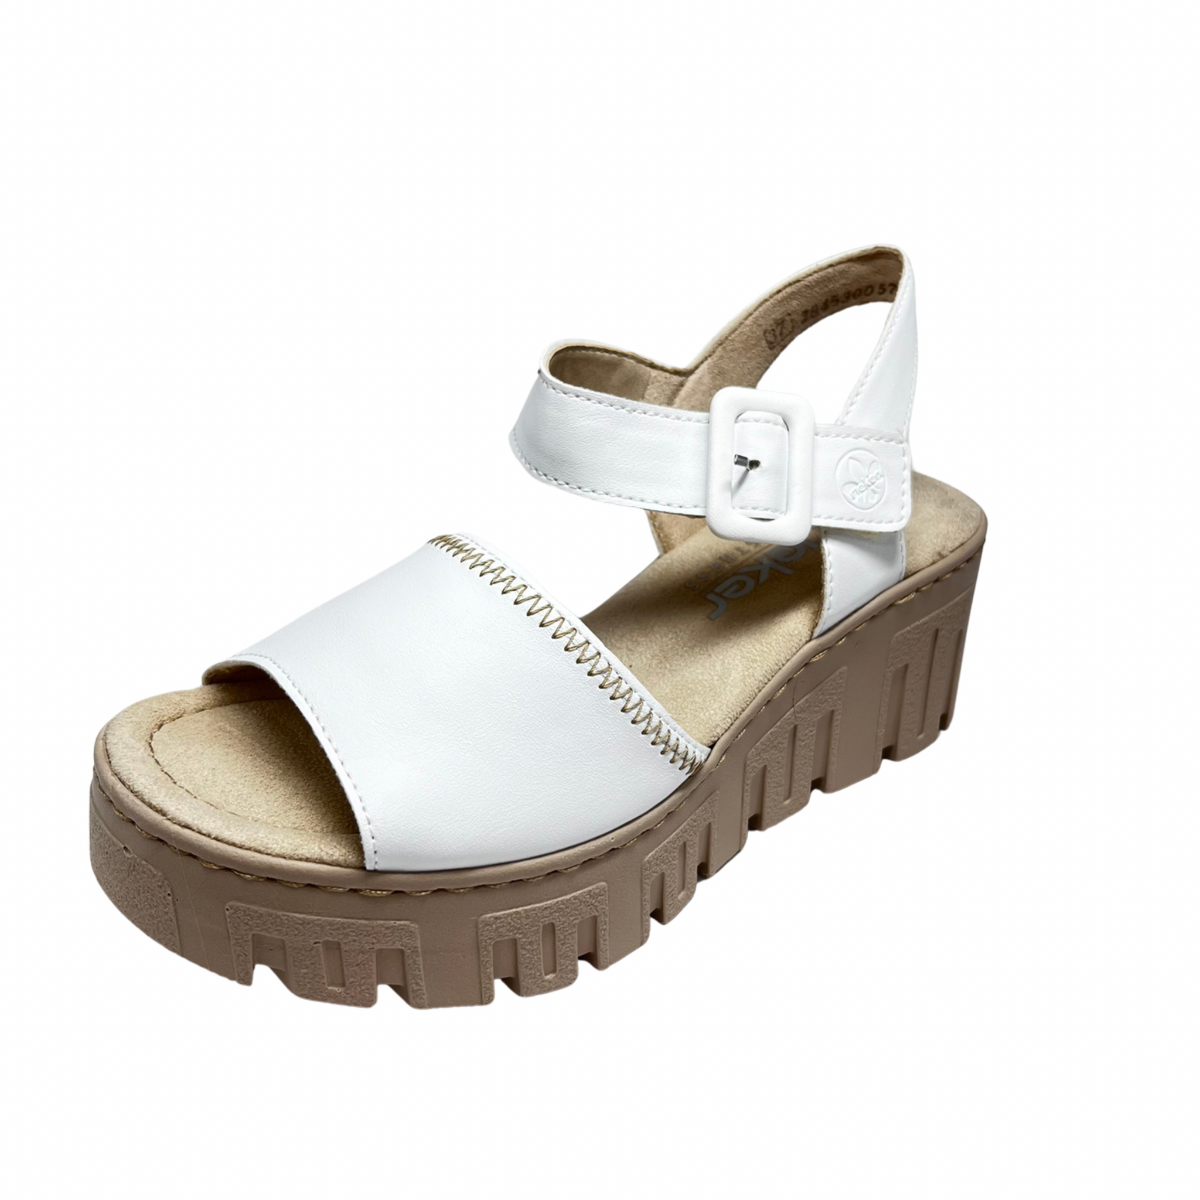 Rieker White and Beige Wedged Sandal